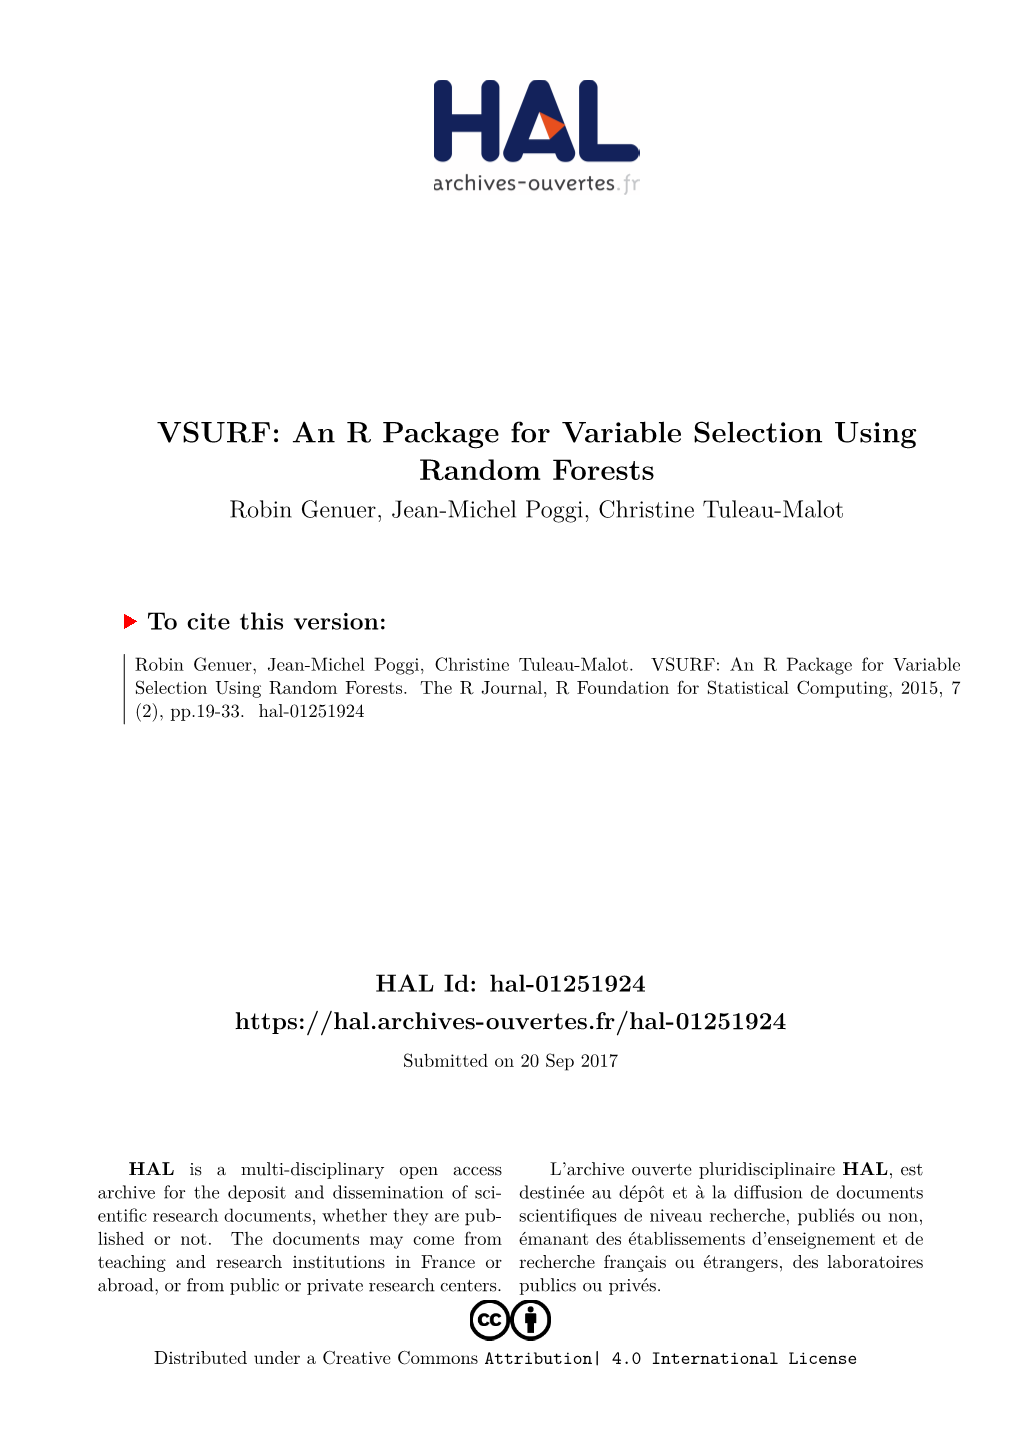 VSURF: an R Package for Variable Selection Using Random Forests Robin Genuer, Jean-Michel Poggi, Christine Tuleau-Malot